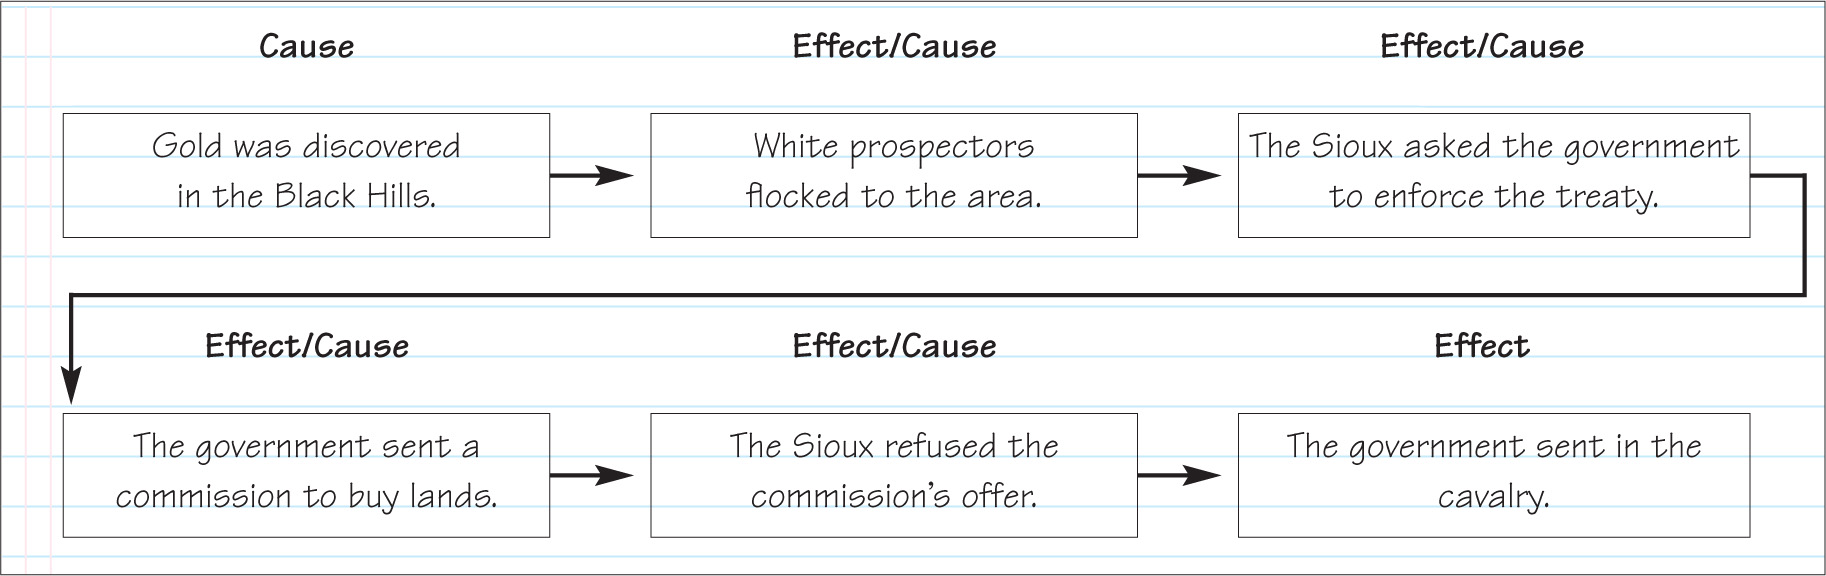 A cause-and-effect diagram shows a progression of causes leading to effects.